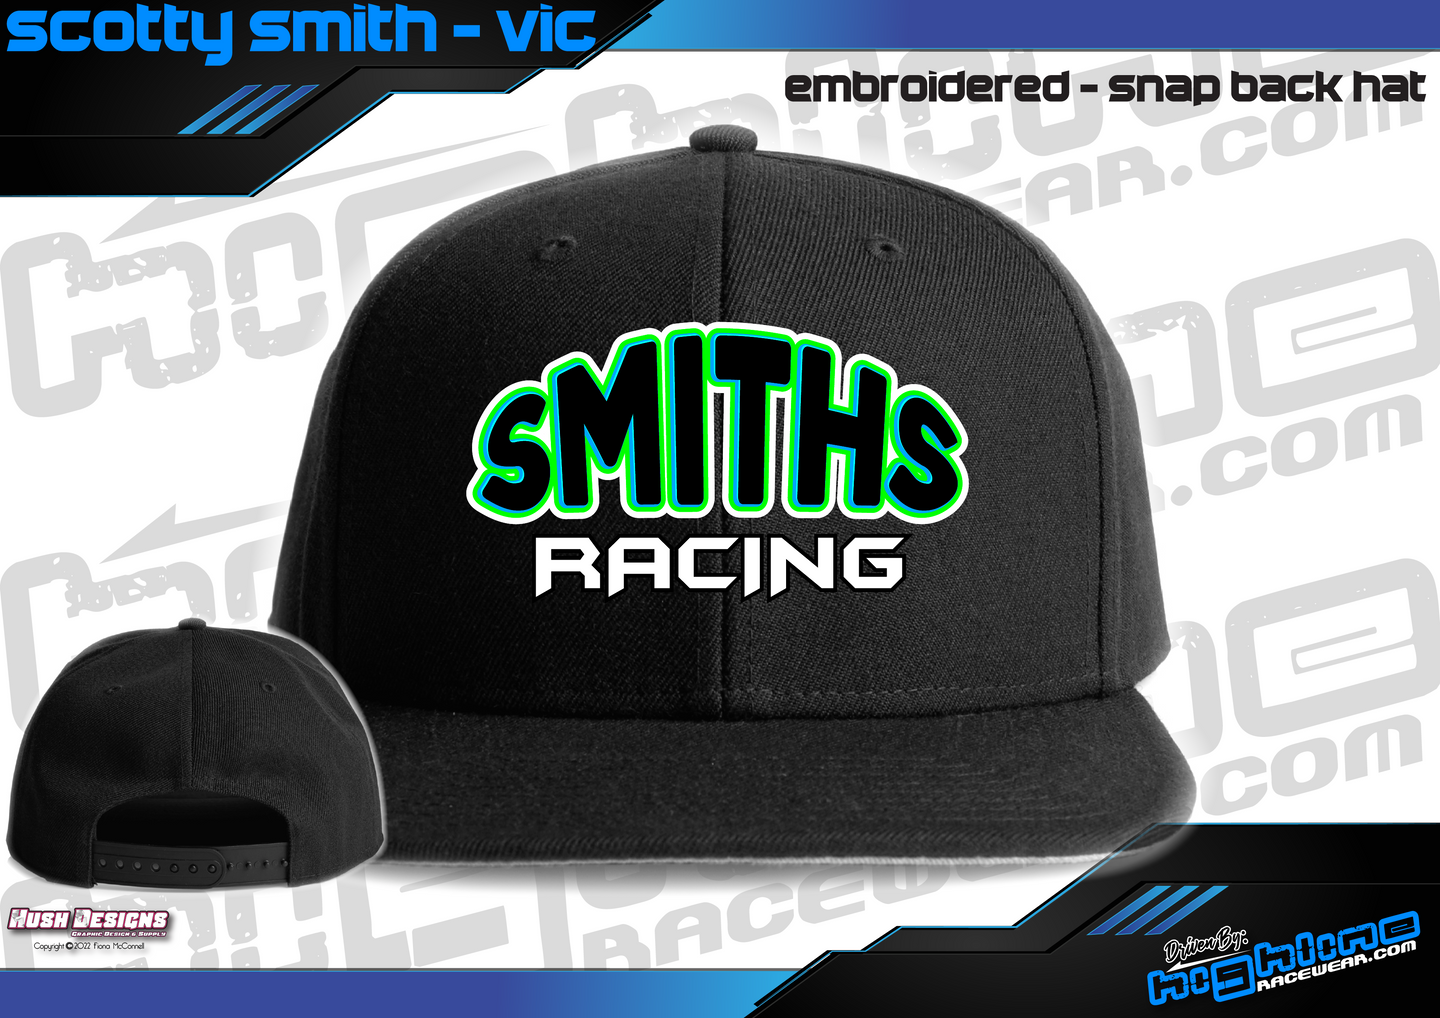 Embroidered Snap Back CAP - Scotty Smith